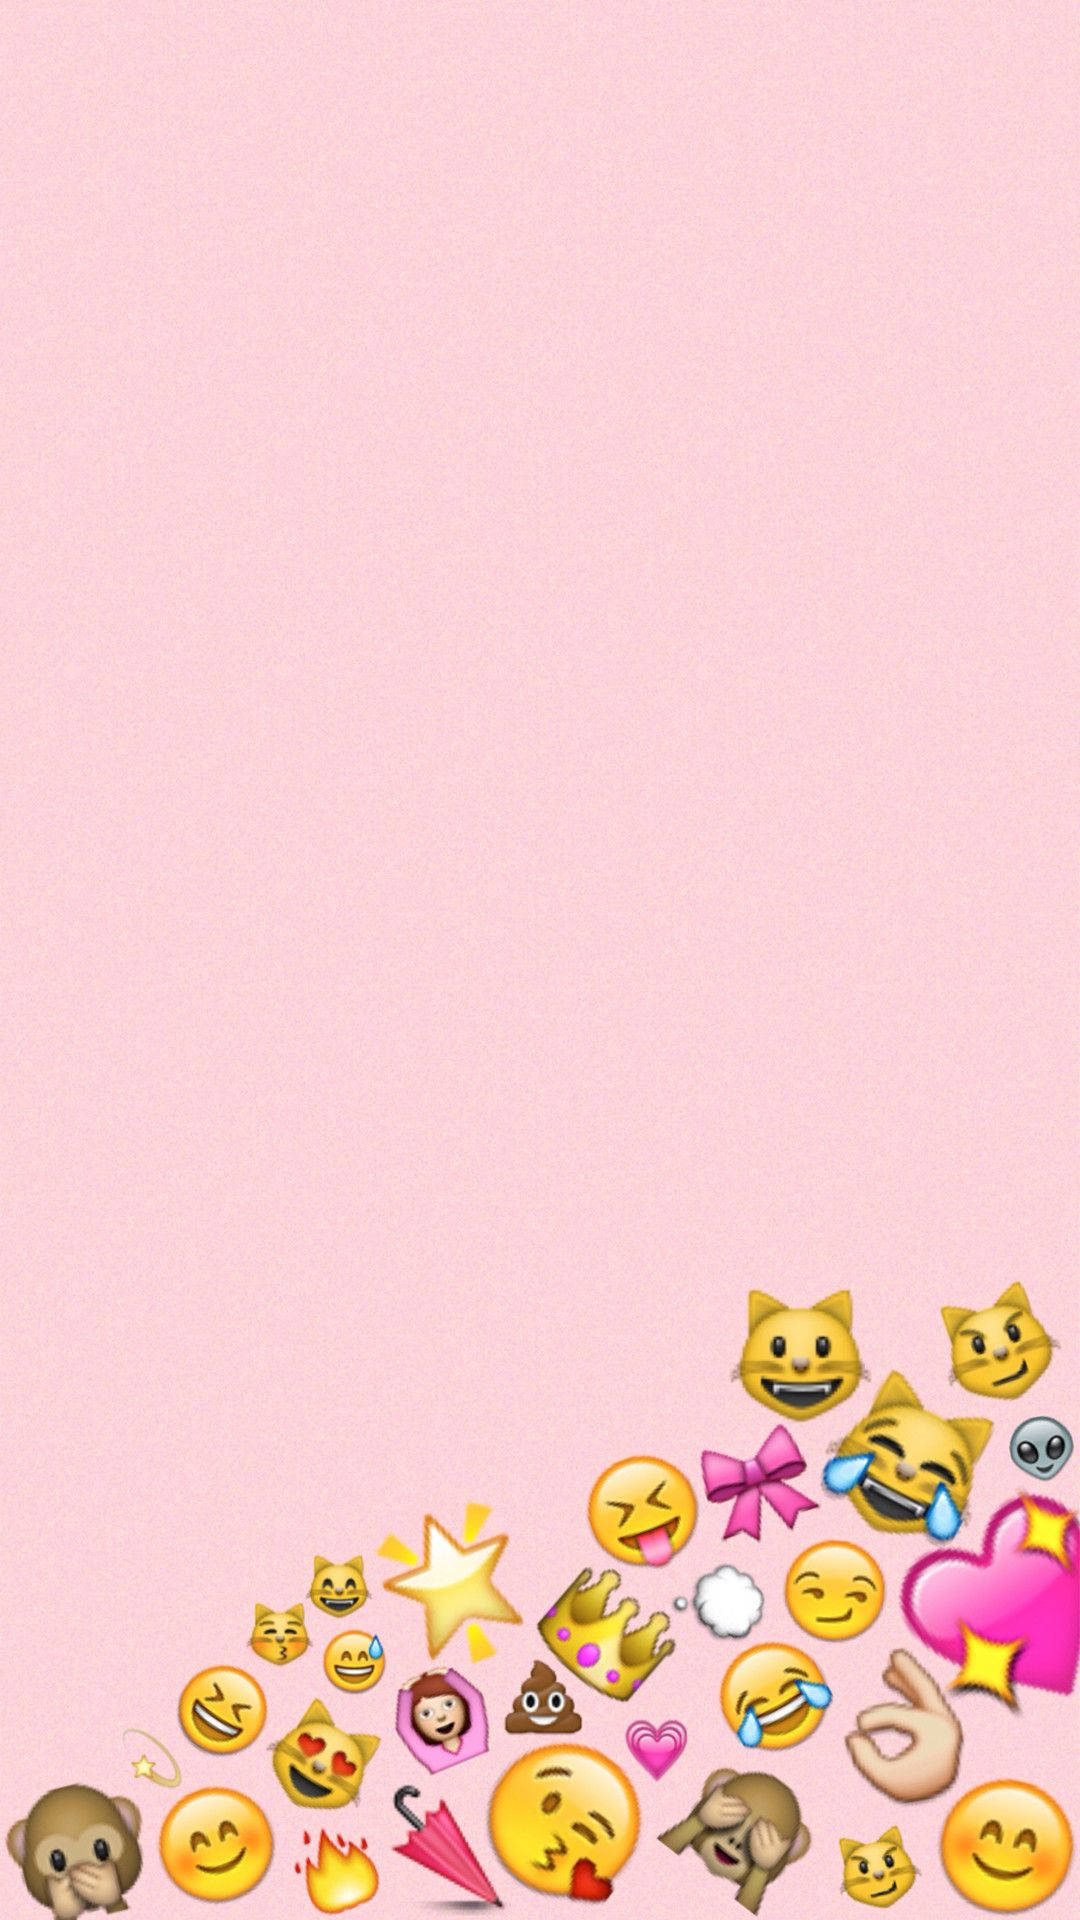 A pink background with emoticons on it - Emoji